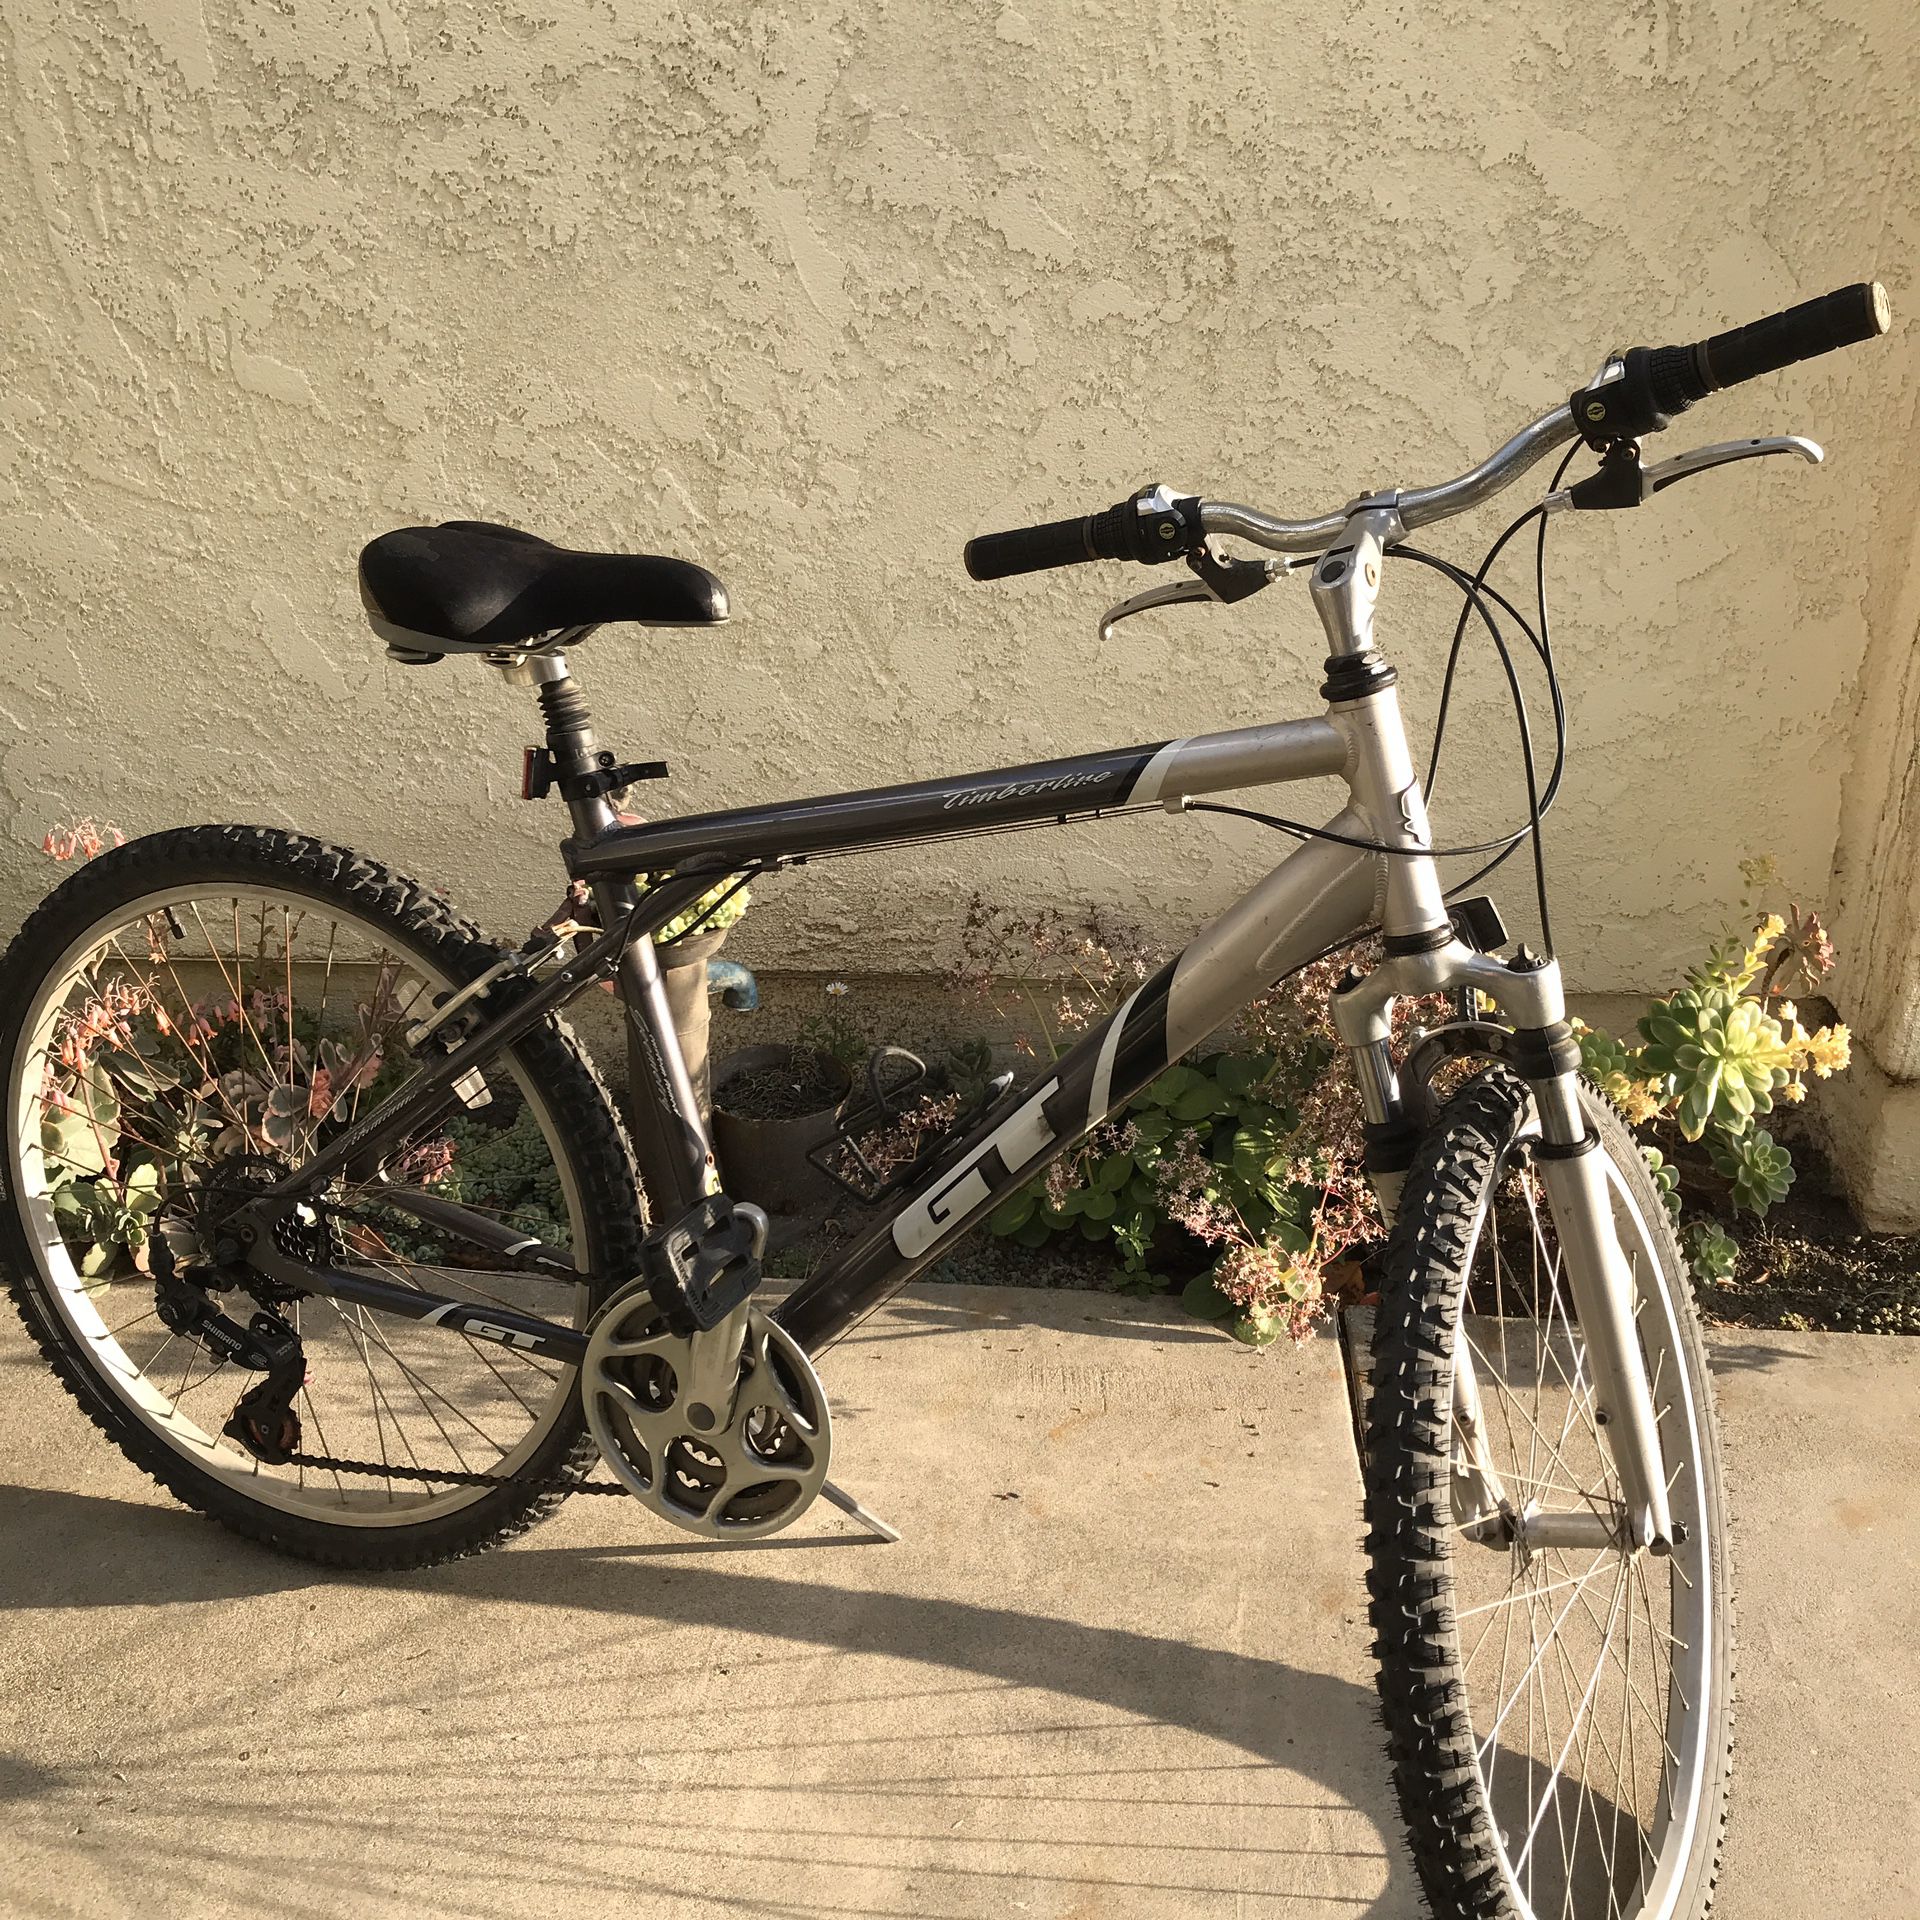 Timberline GT Mens Bike 26” x 2.0 Silver versa Track Forte Shimano feel free to stop over and test it